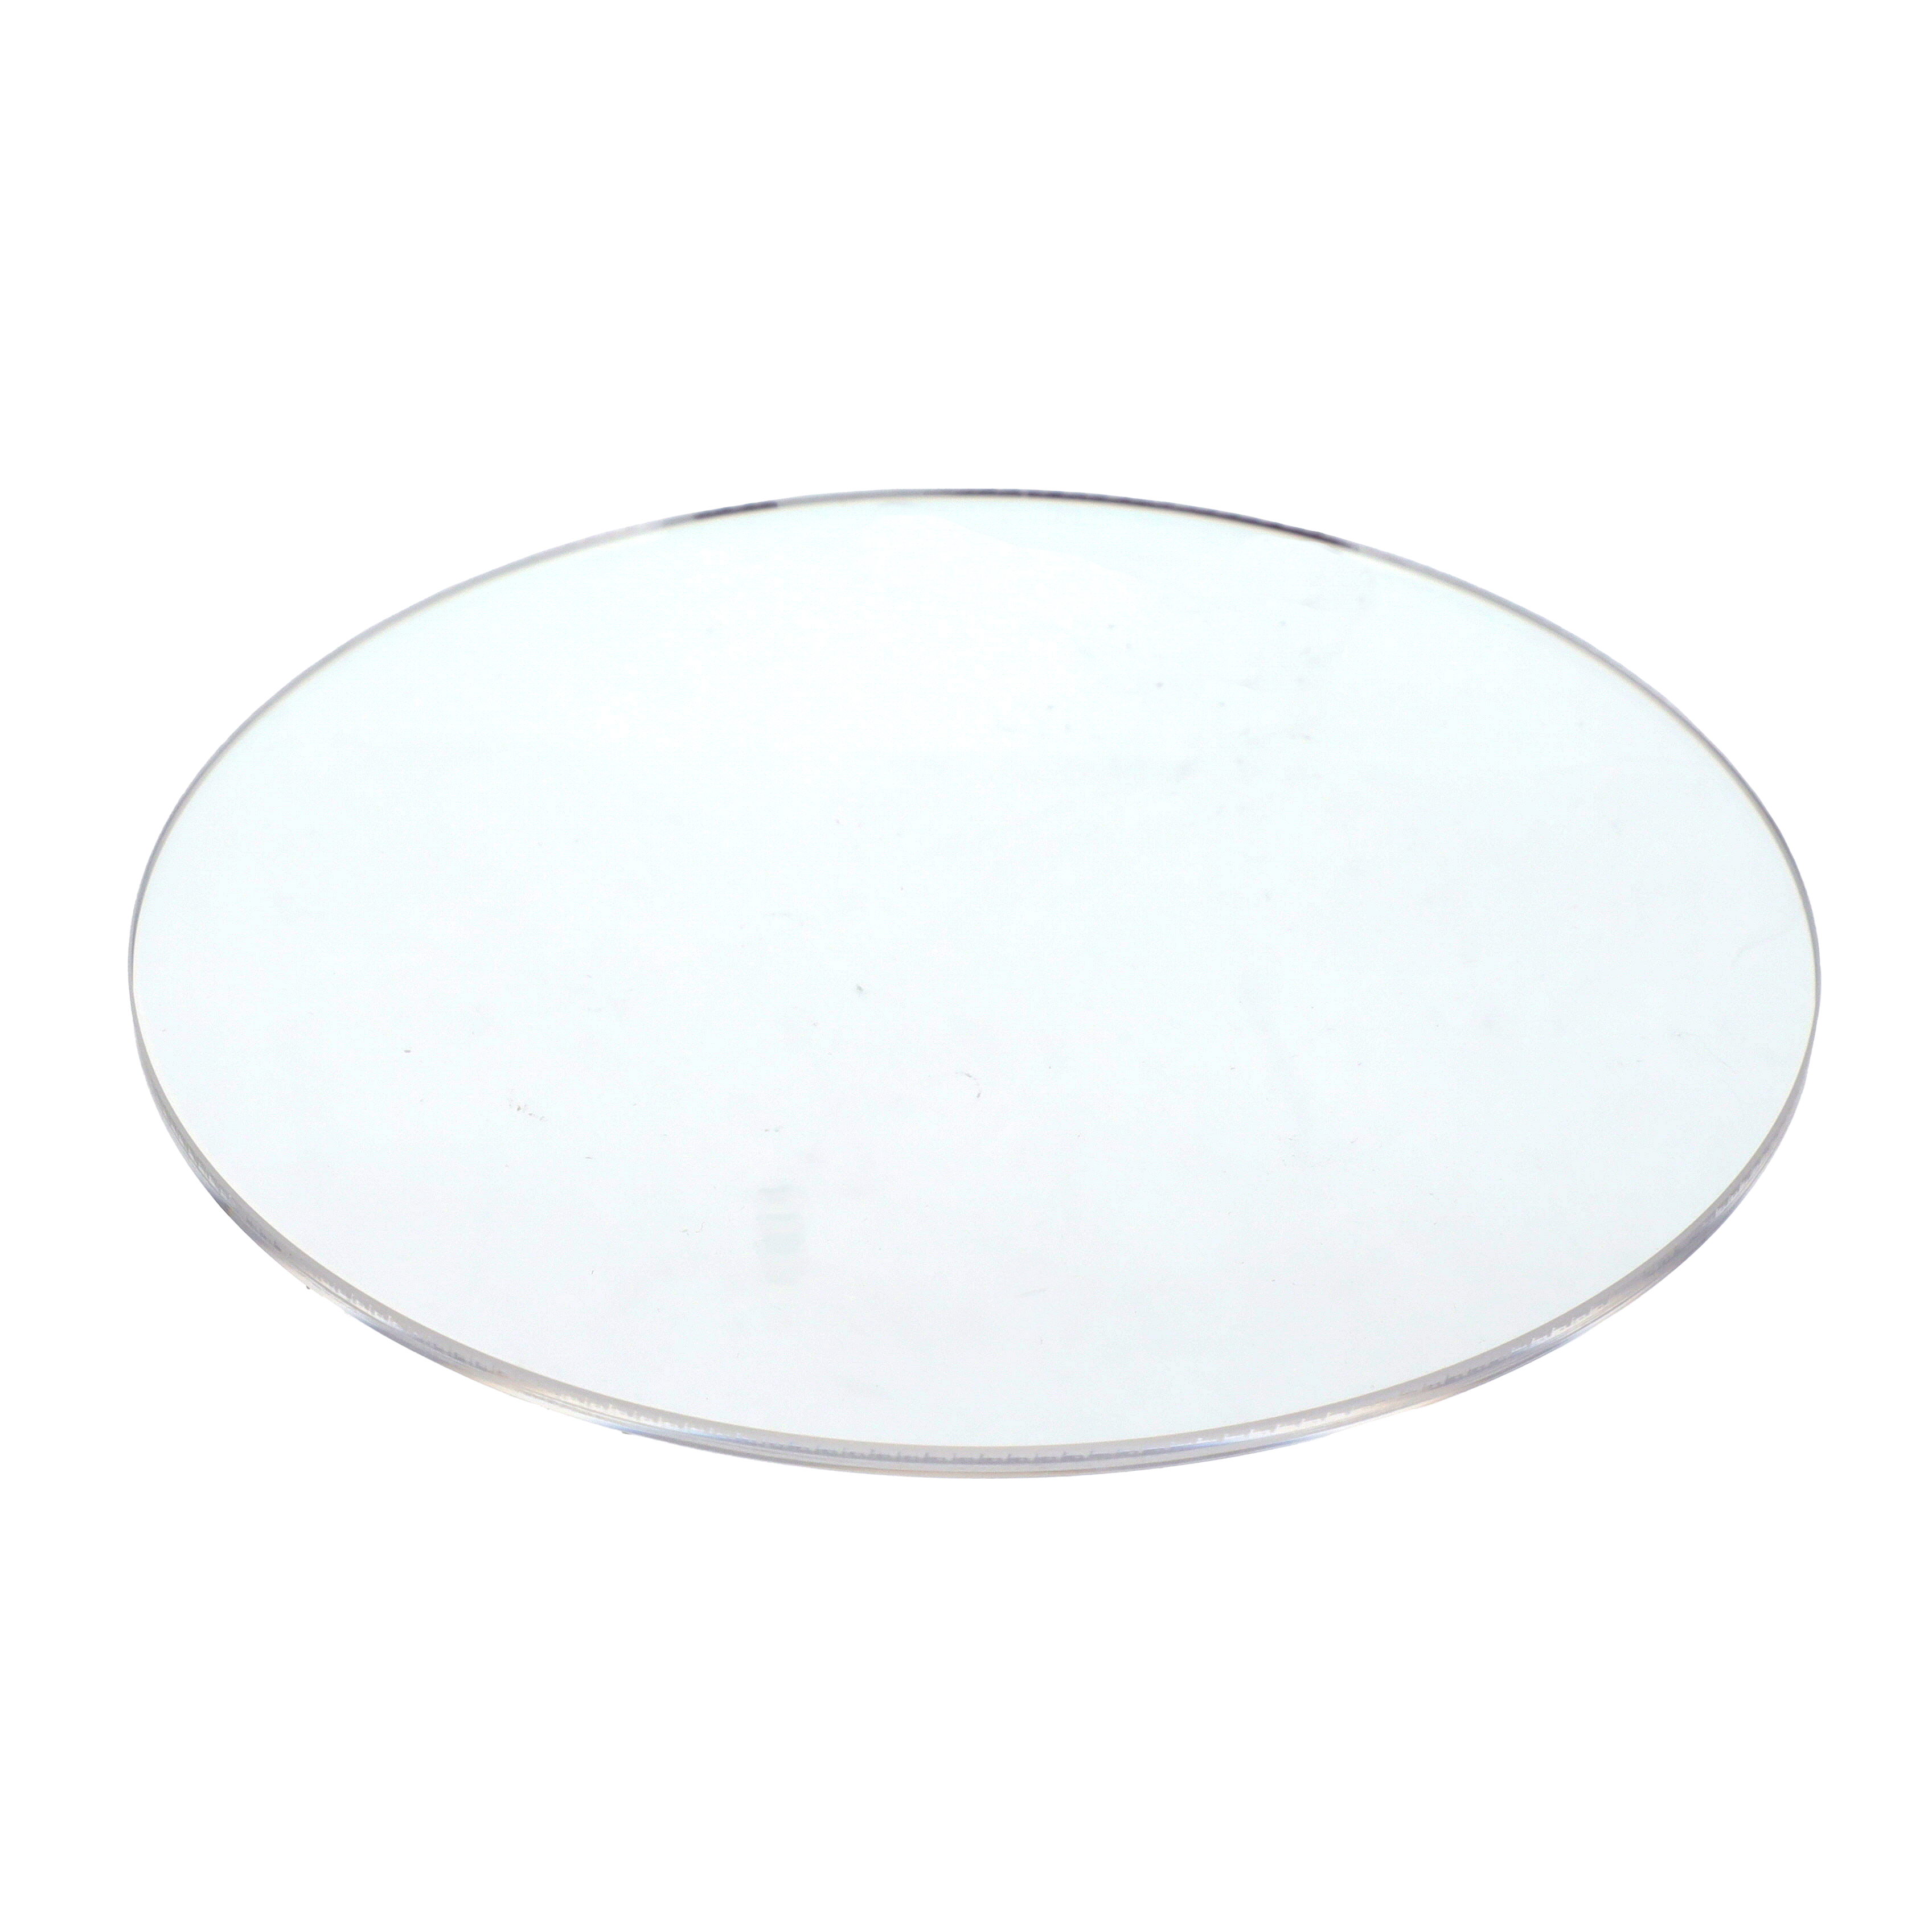 【4401-513-006-00】PROTECTIVE GLASS; FUSED SILICA;